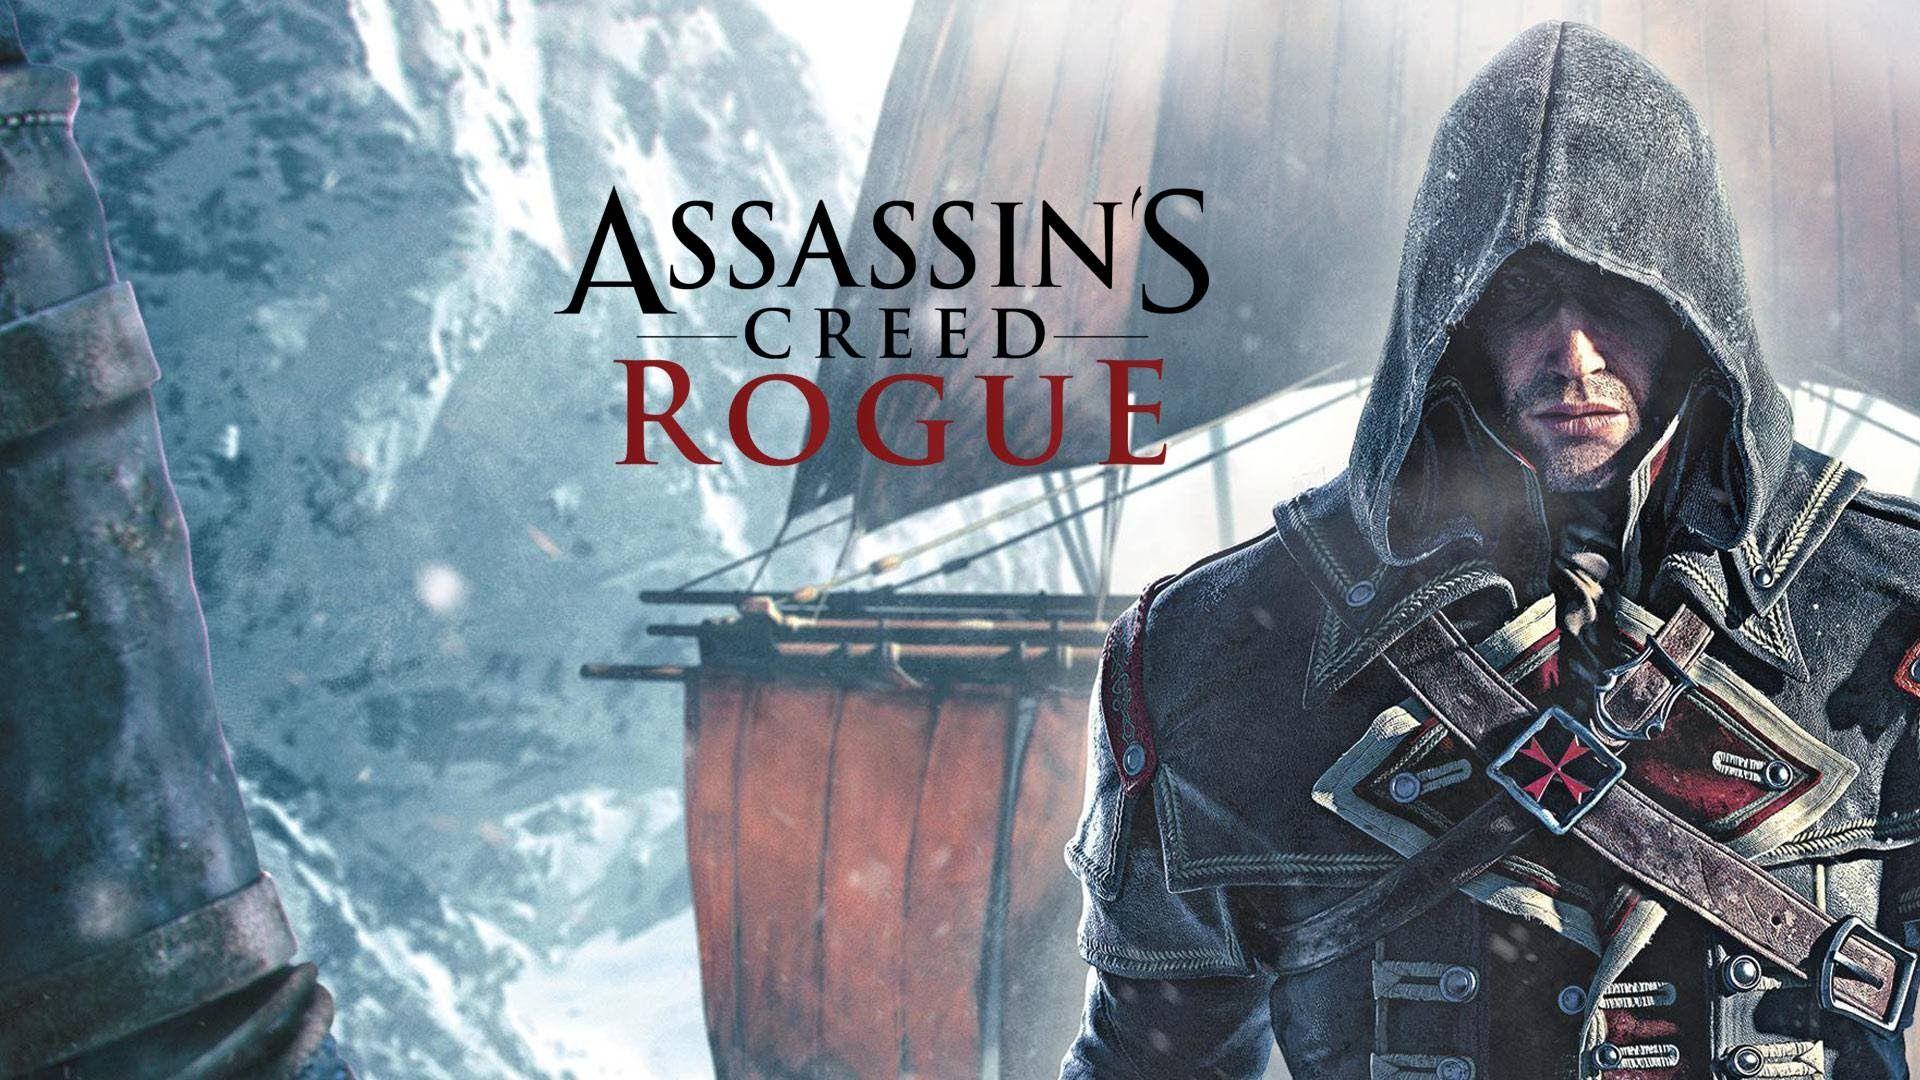 Assassin's Creed Rogue (The Movie) [4K]